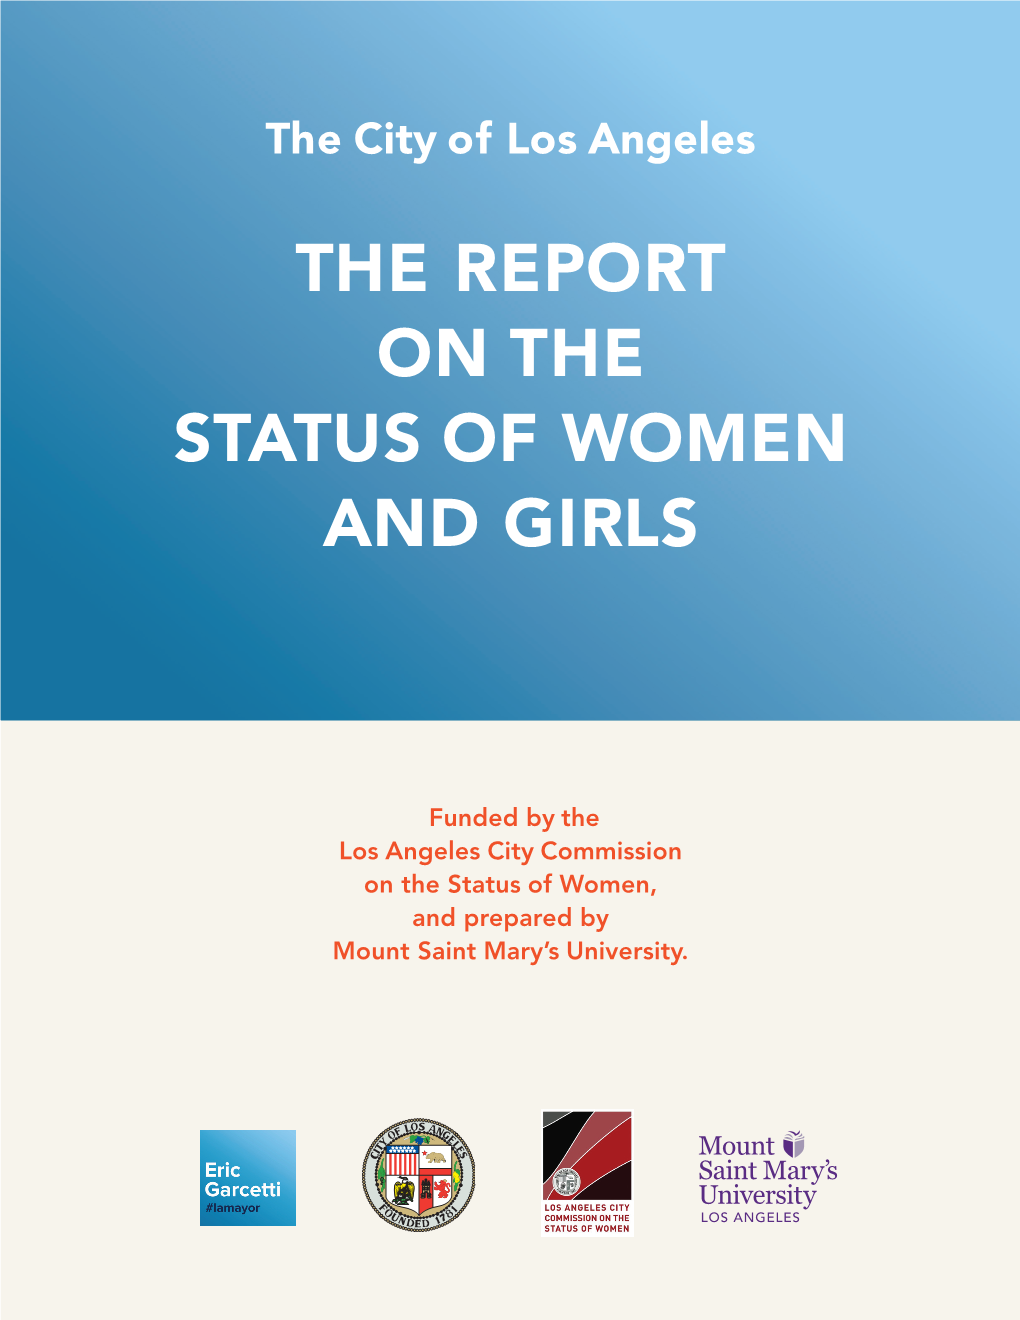 Report on the Status of Women and Girls in Los Angeles